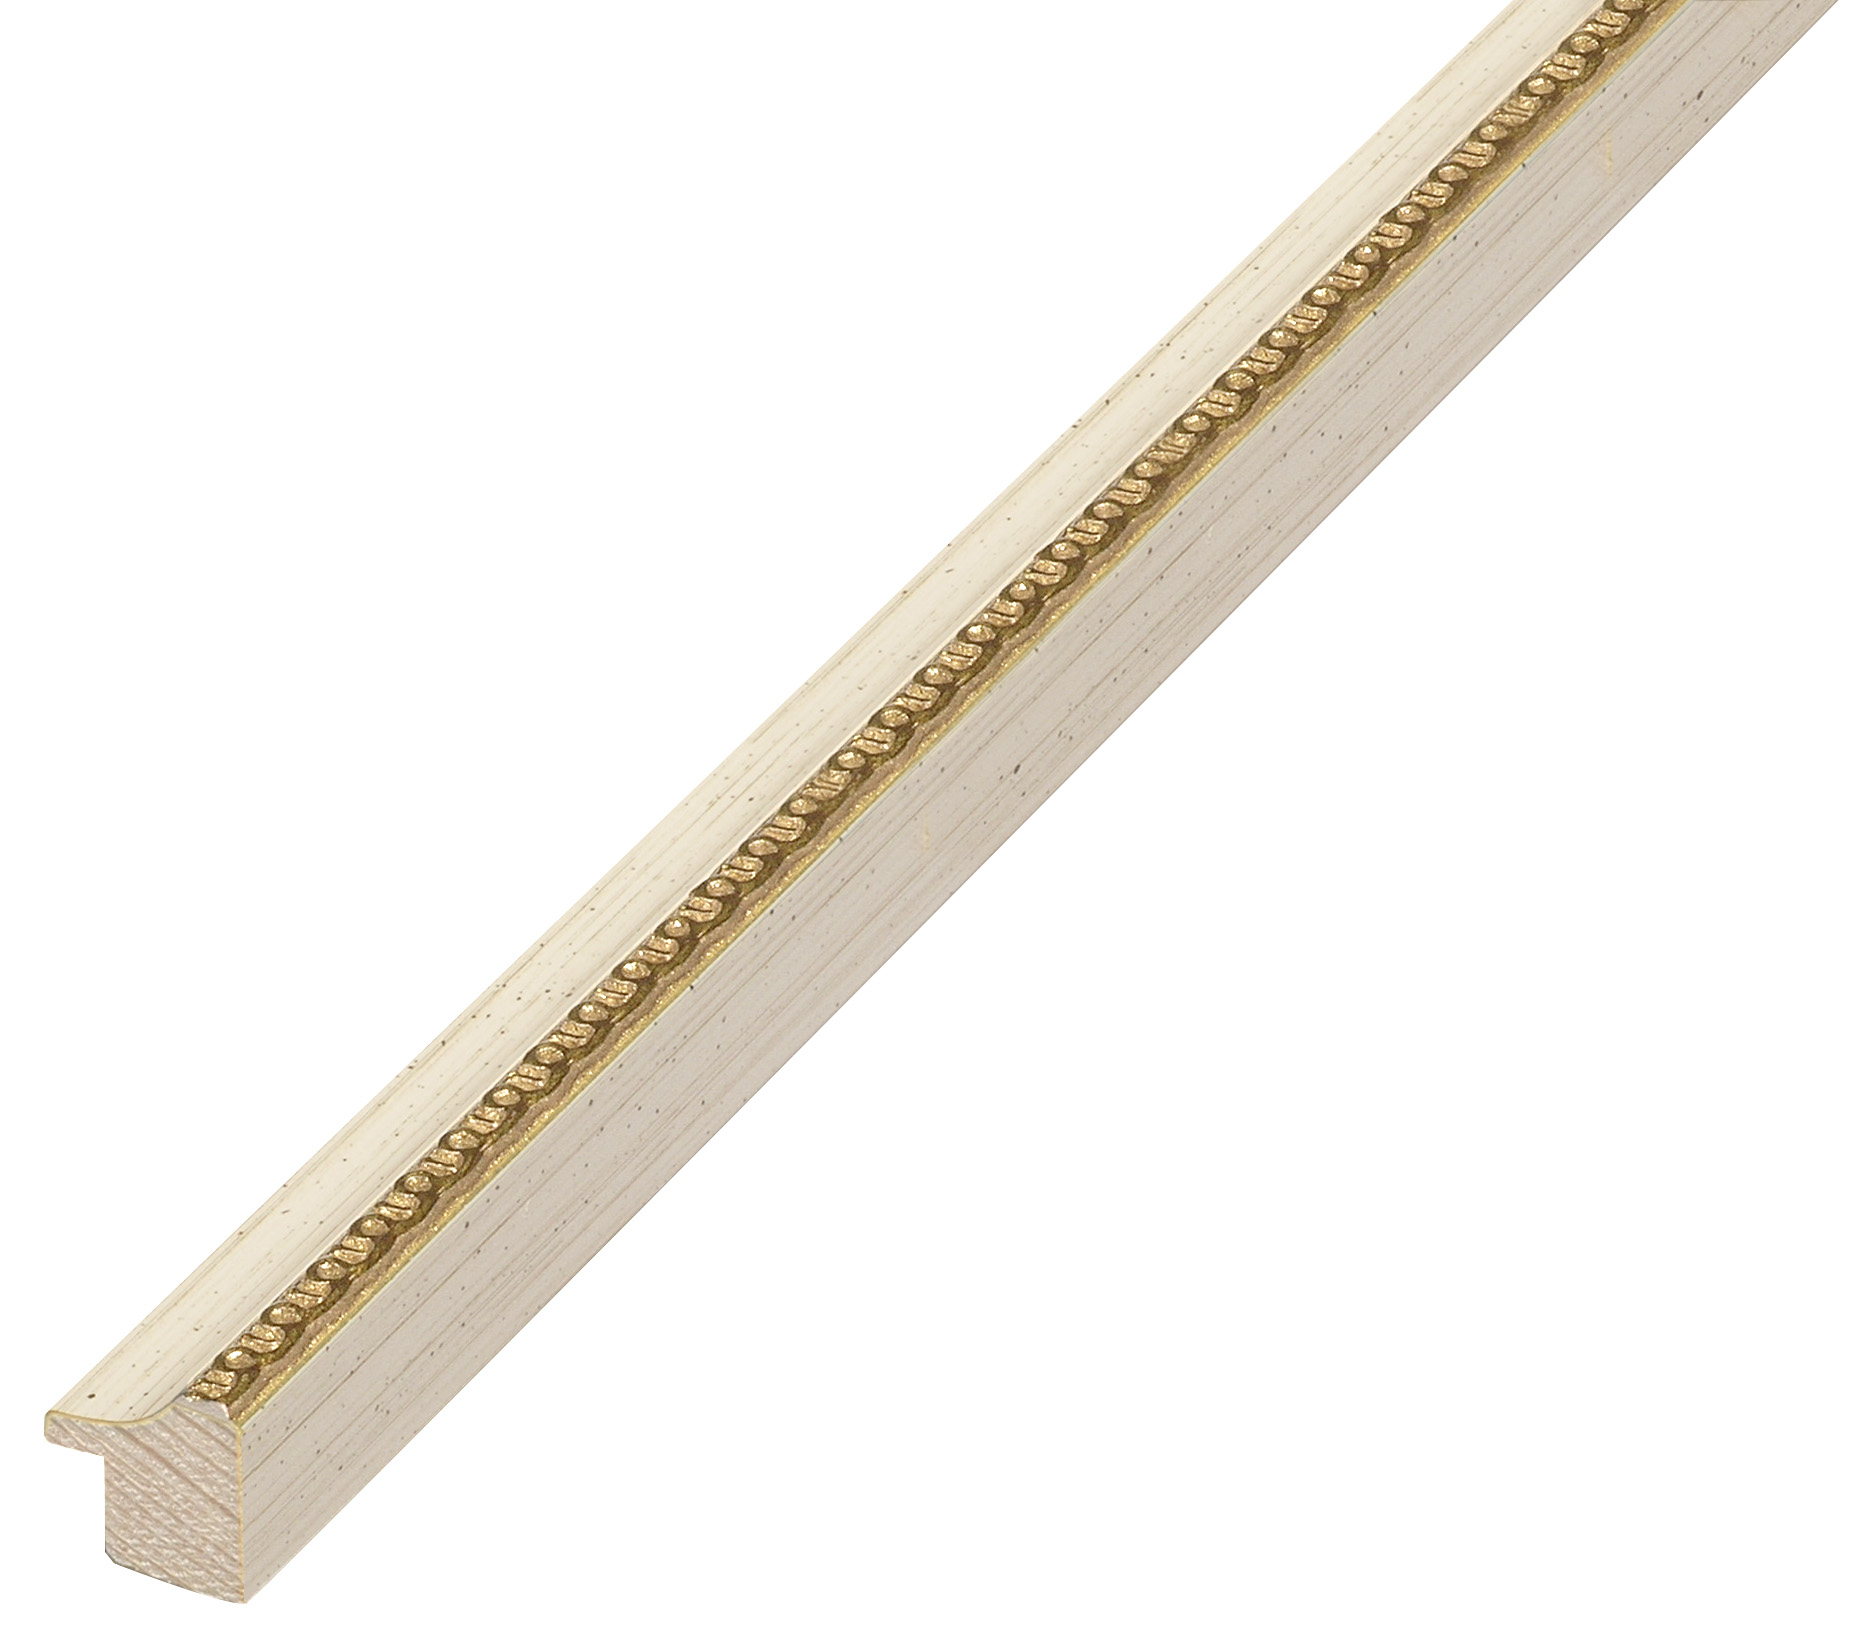 Moulding finger-jointed pine - Width 20mm Height 20 - Cream, gold band - 236CREMA